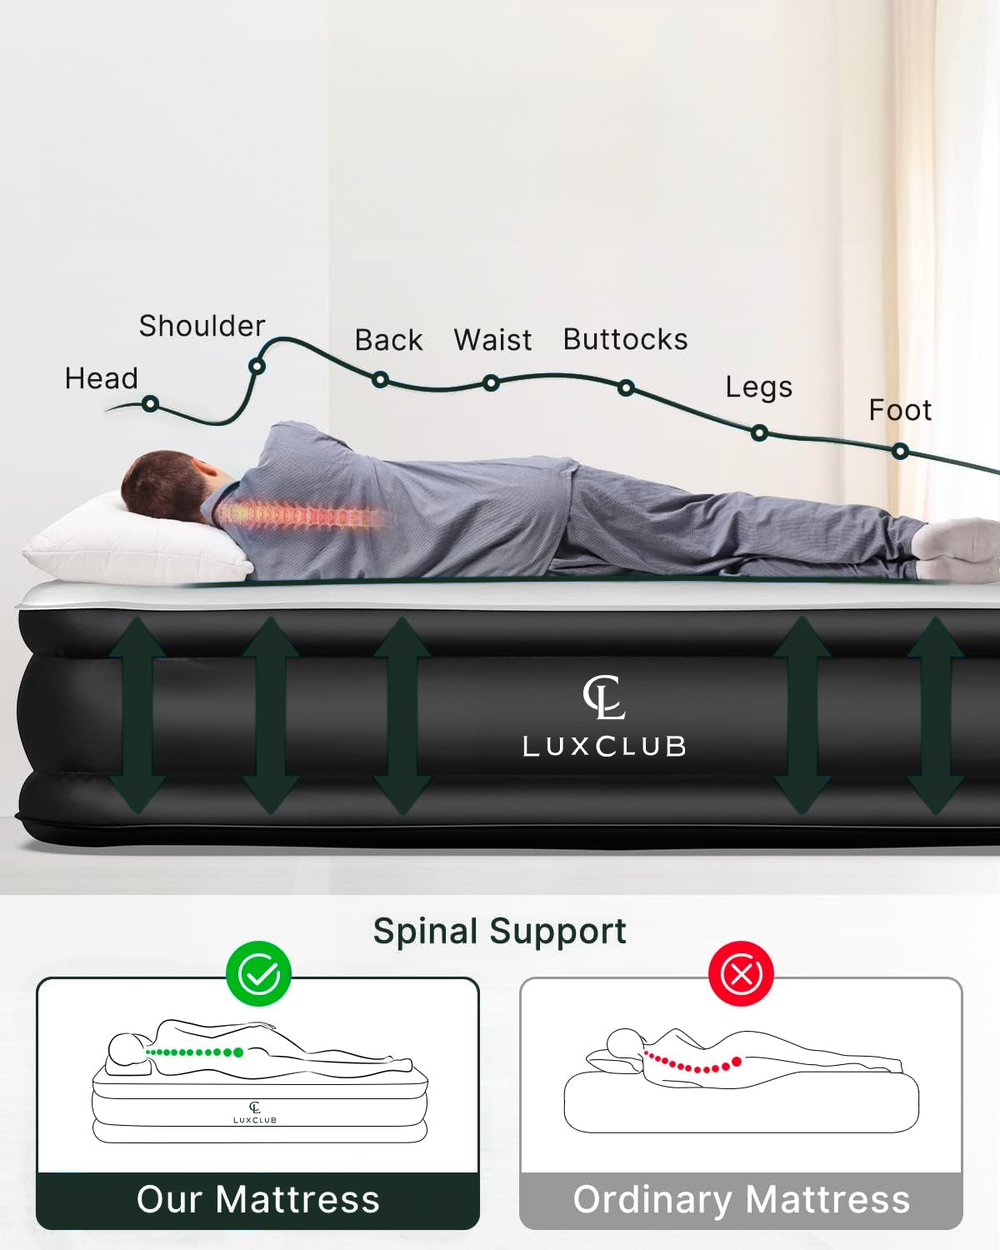 a person lying on a mattress with text: 'Shoulder Back Waist Buttocks Head Legs Foot LUXCLUB Spinal Support LUXCLUB Our Mattress Ordinary Mattress'